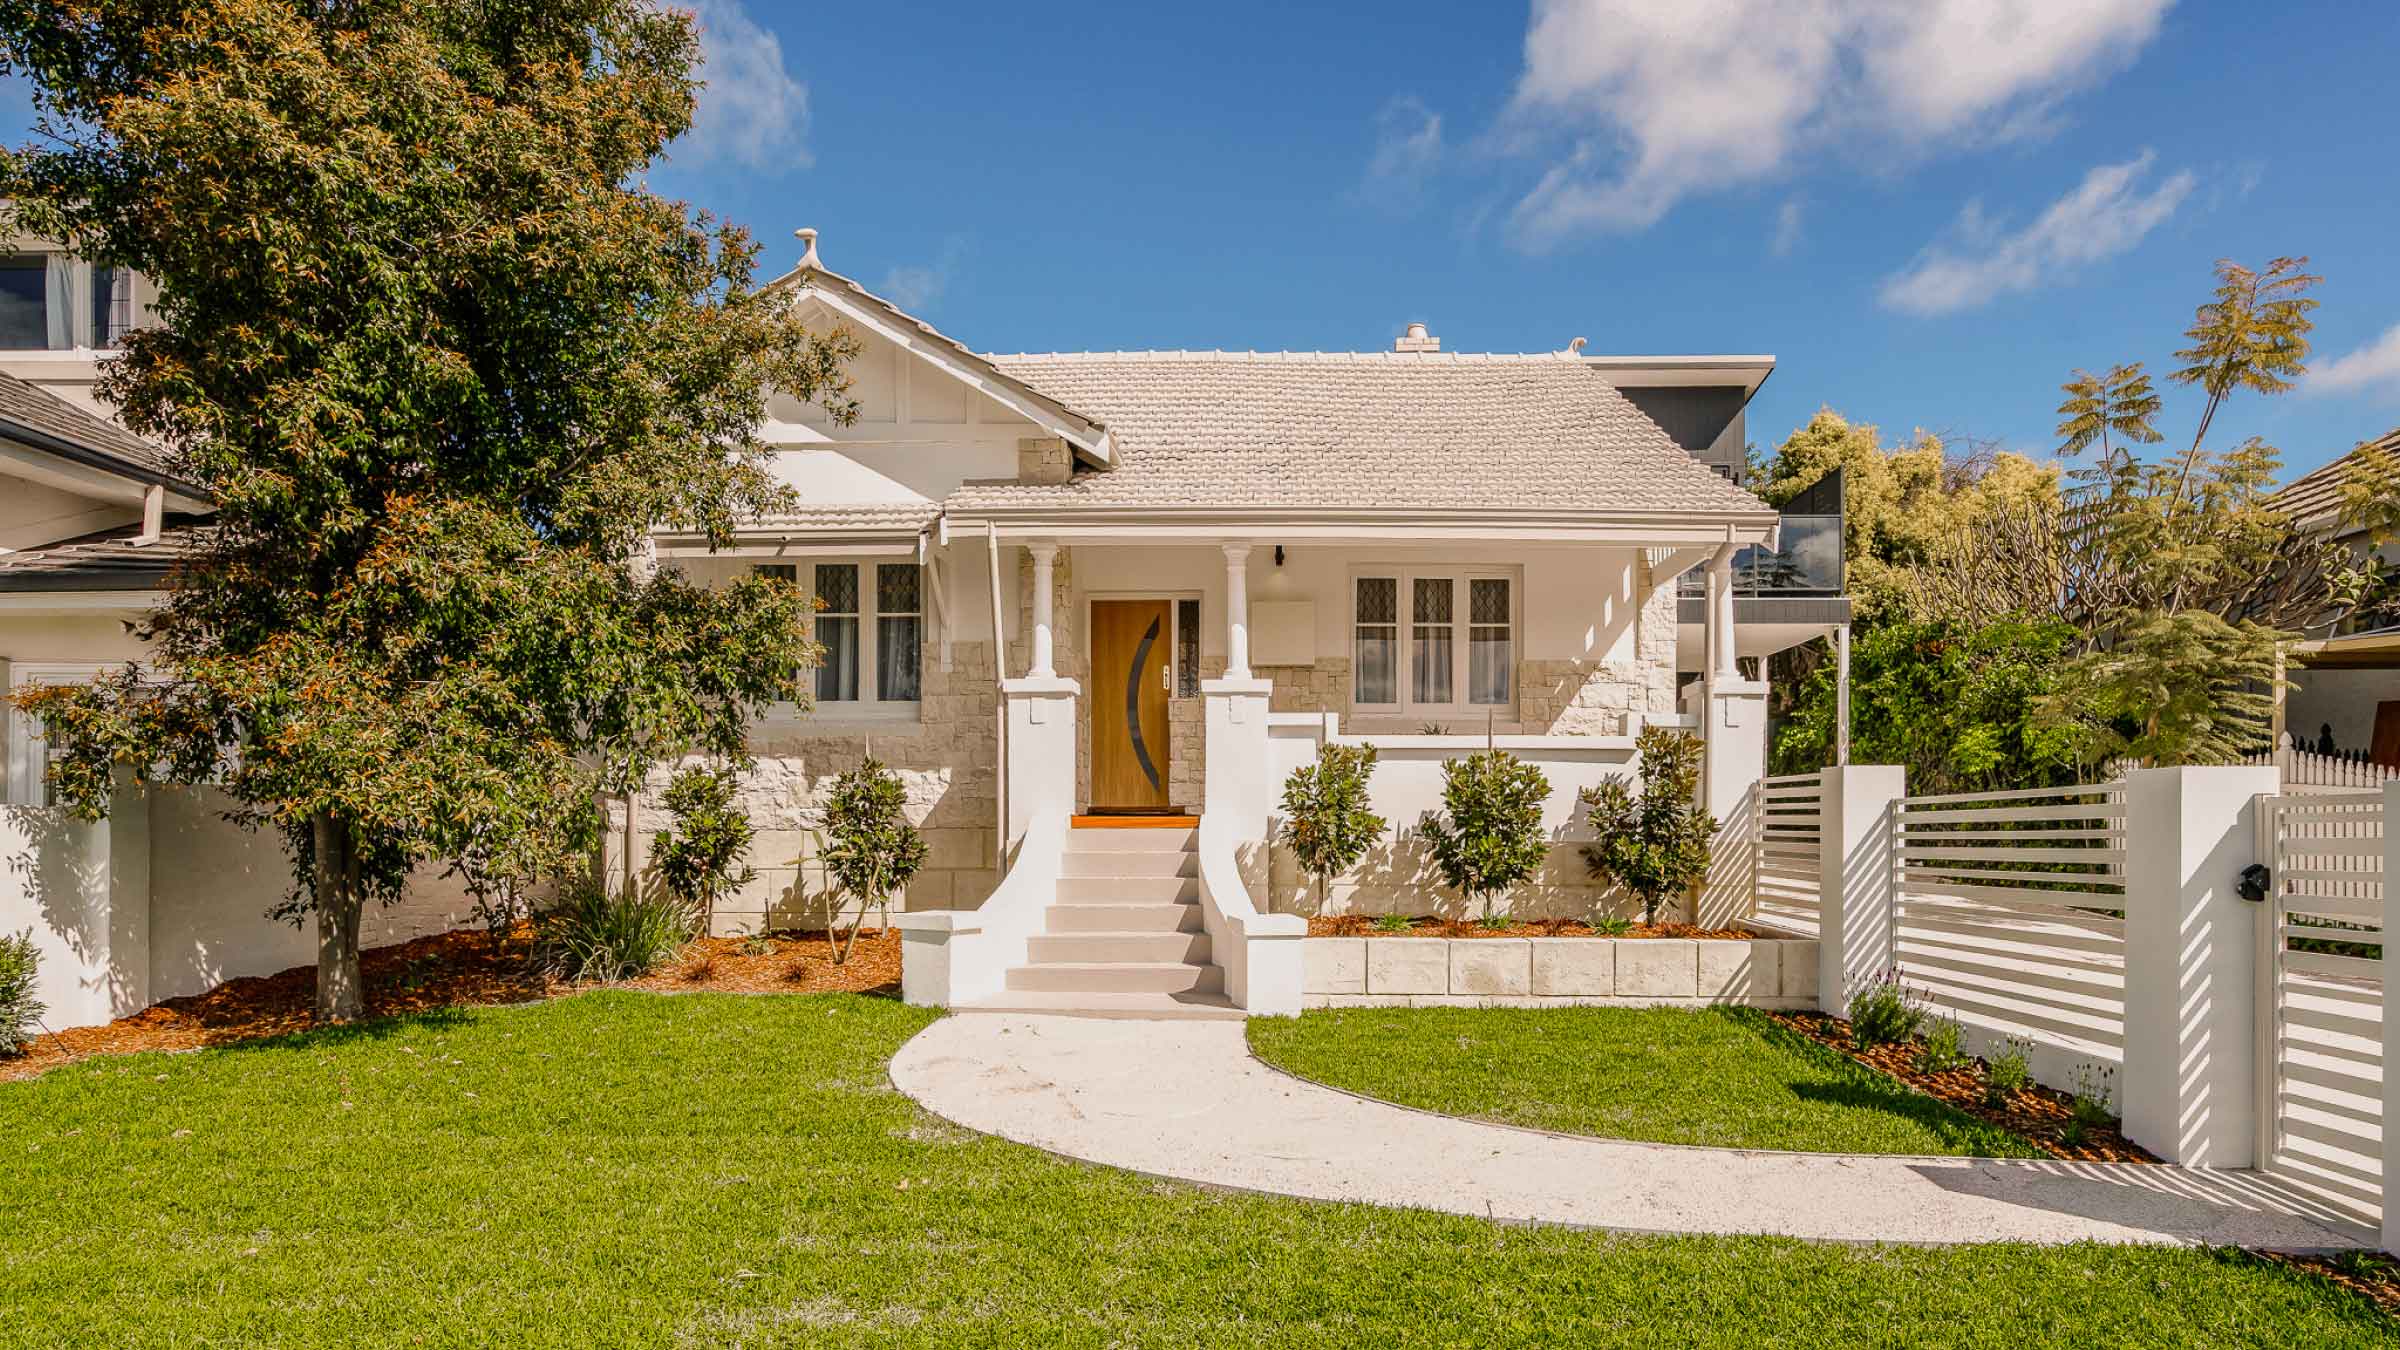 White bungalow with steps leading up to front door. And a beautiful manicured front garden and white wooden fence surround.